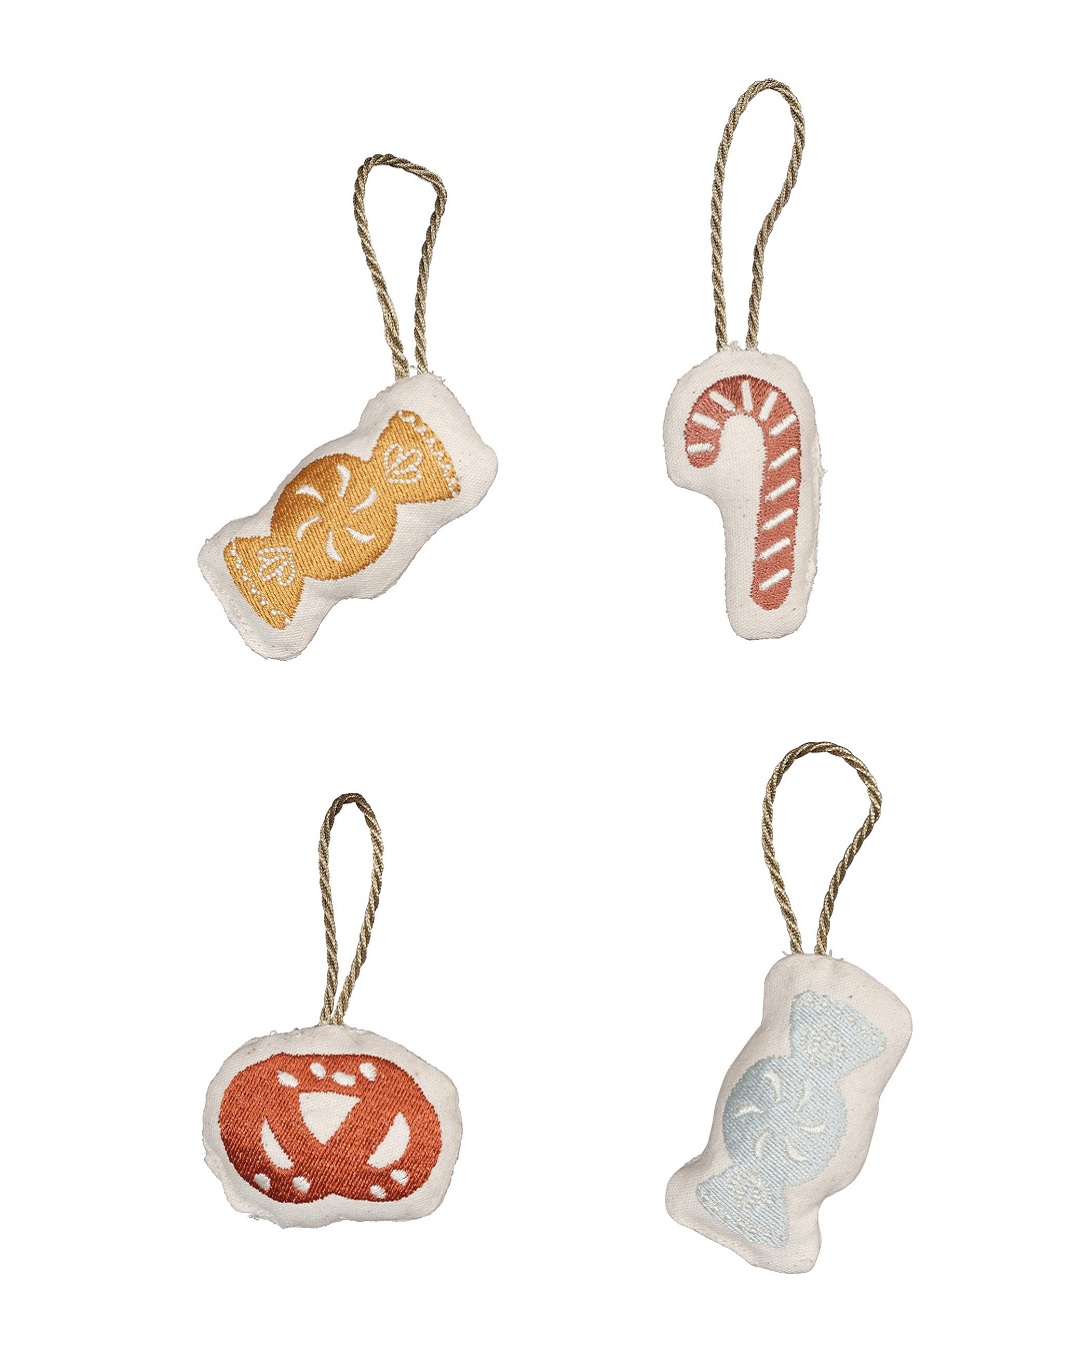 Candy hanging ornaments